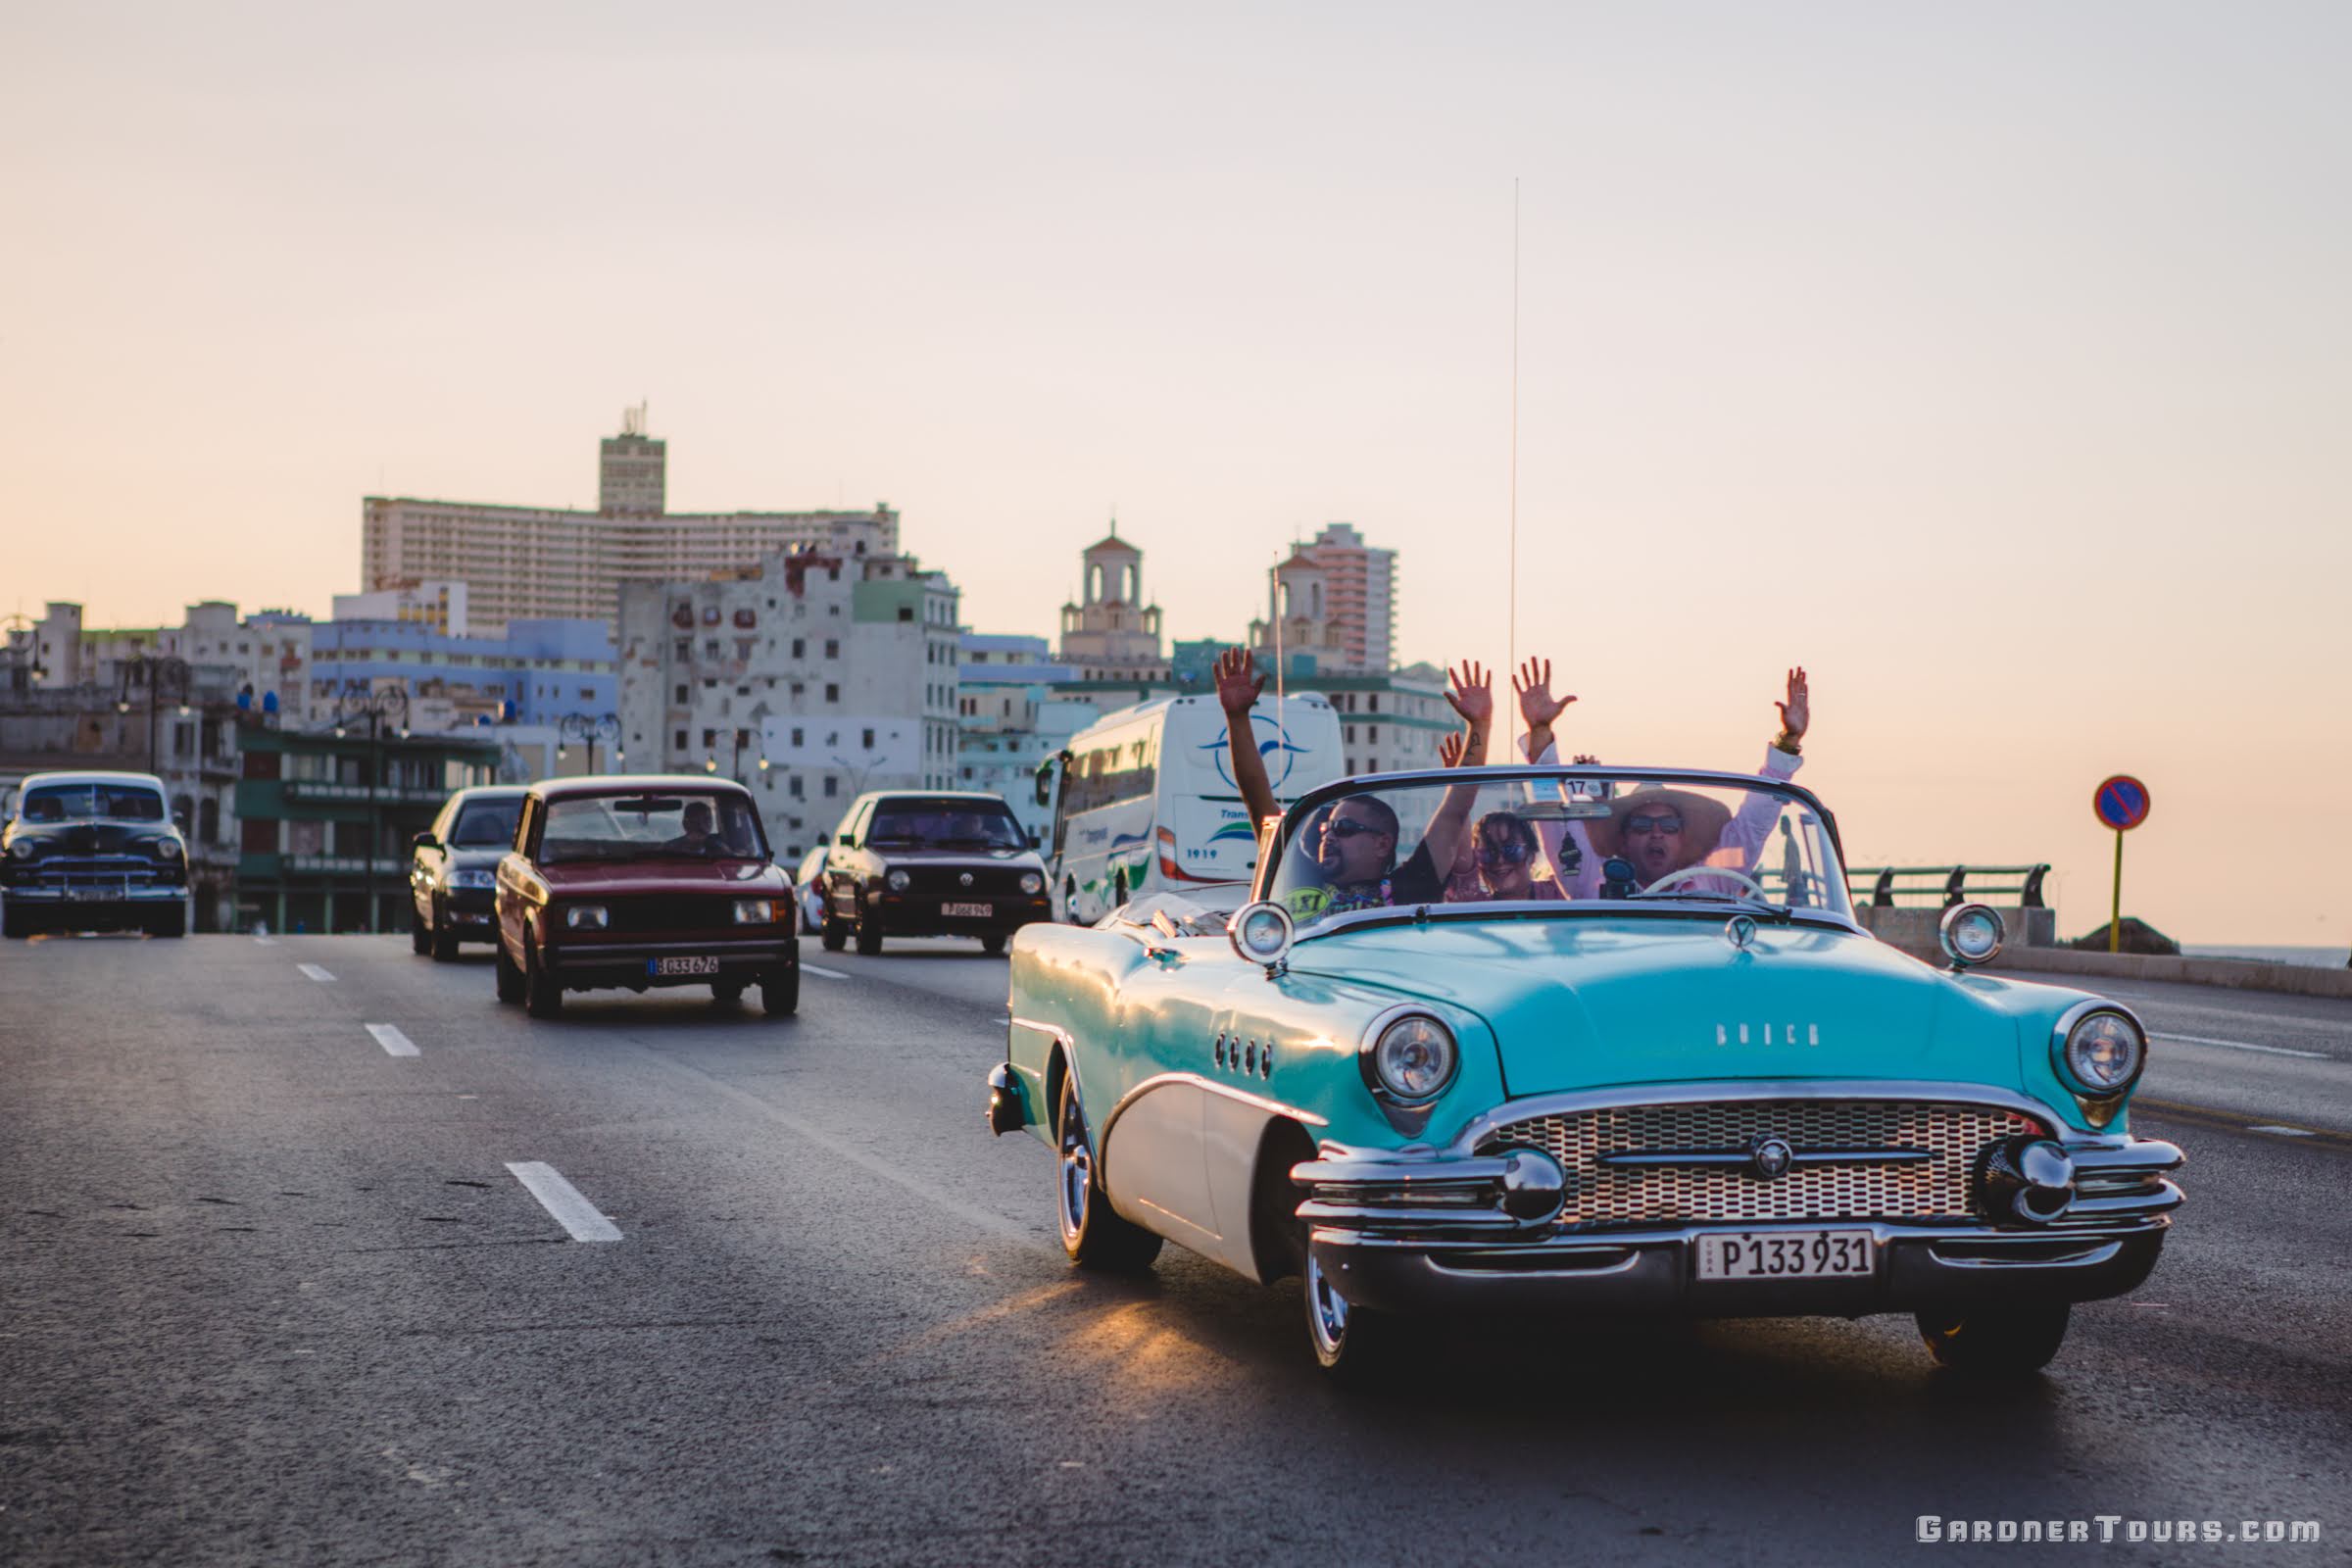 Friends Riding down the Malecon in Havana Cuba with their hands in the air at sunset in a Turquoise Buick Classic Car 